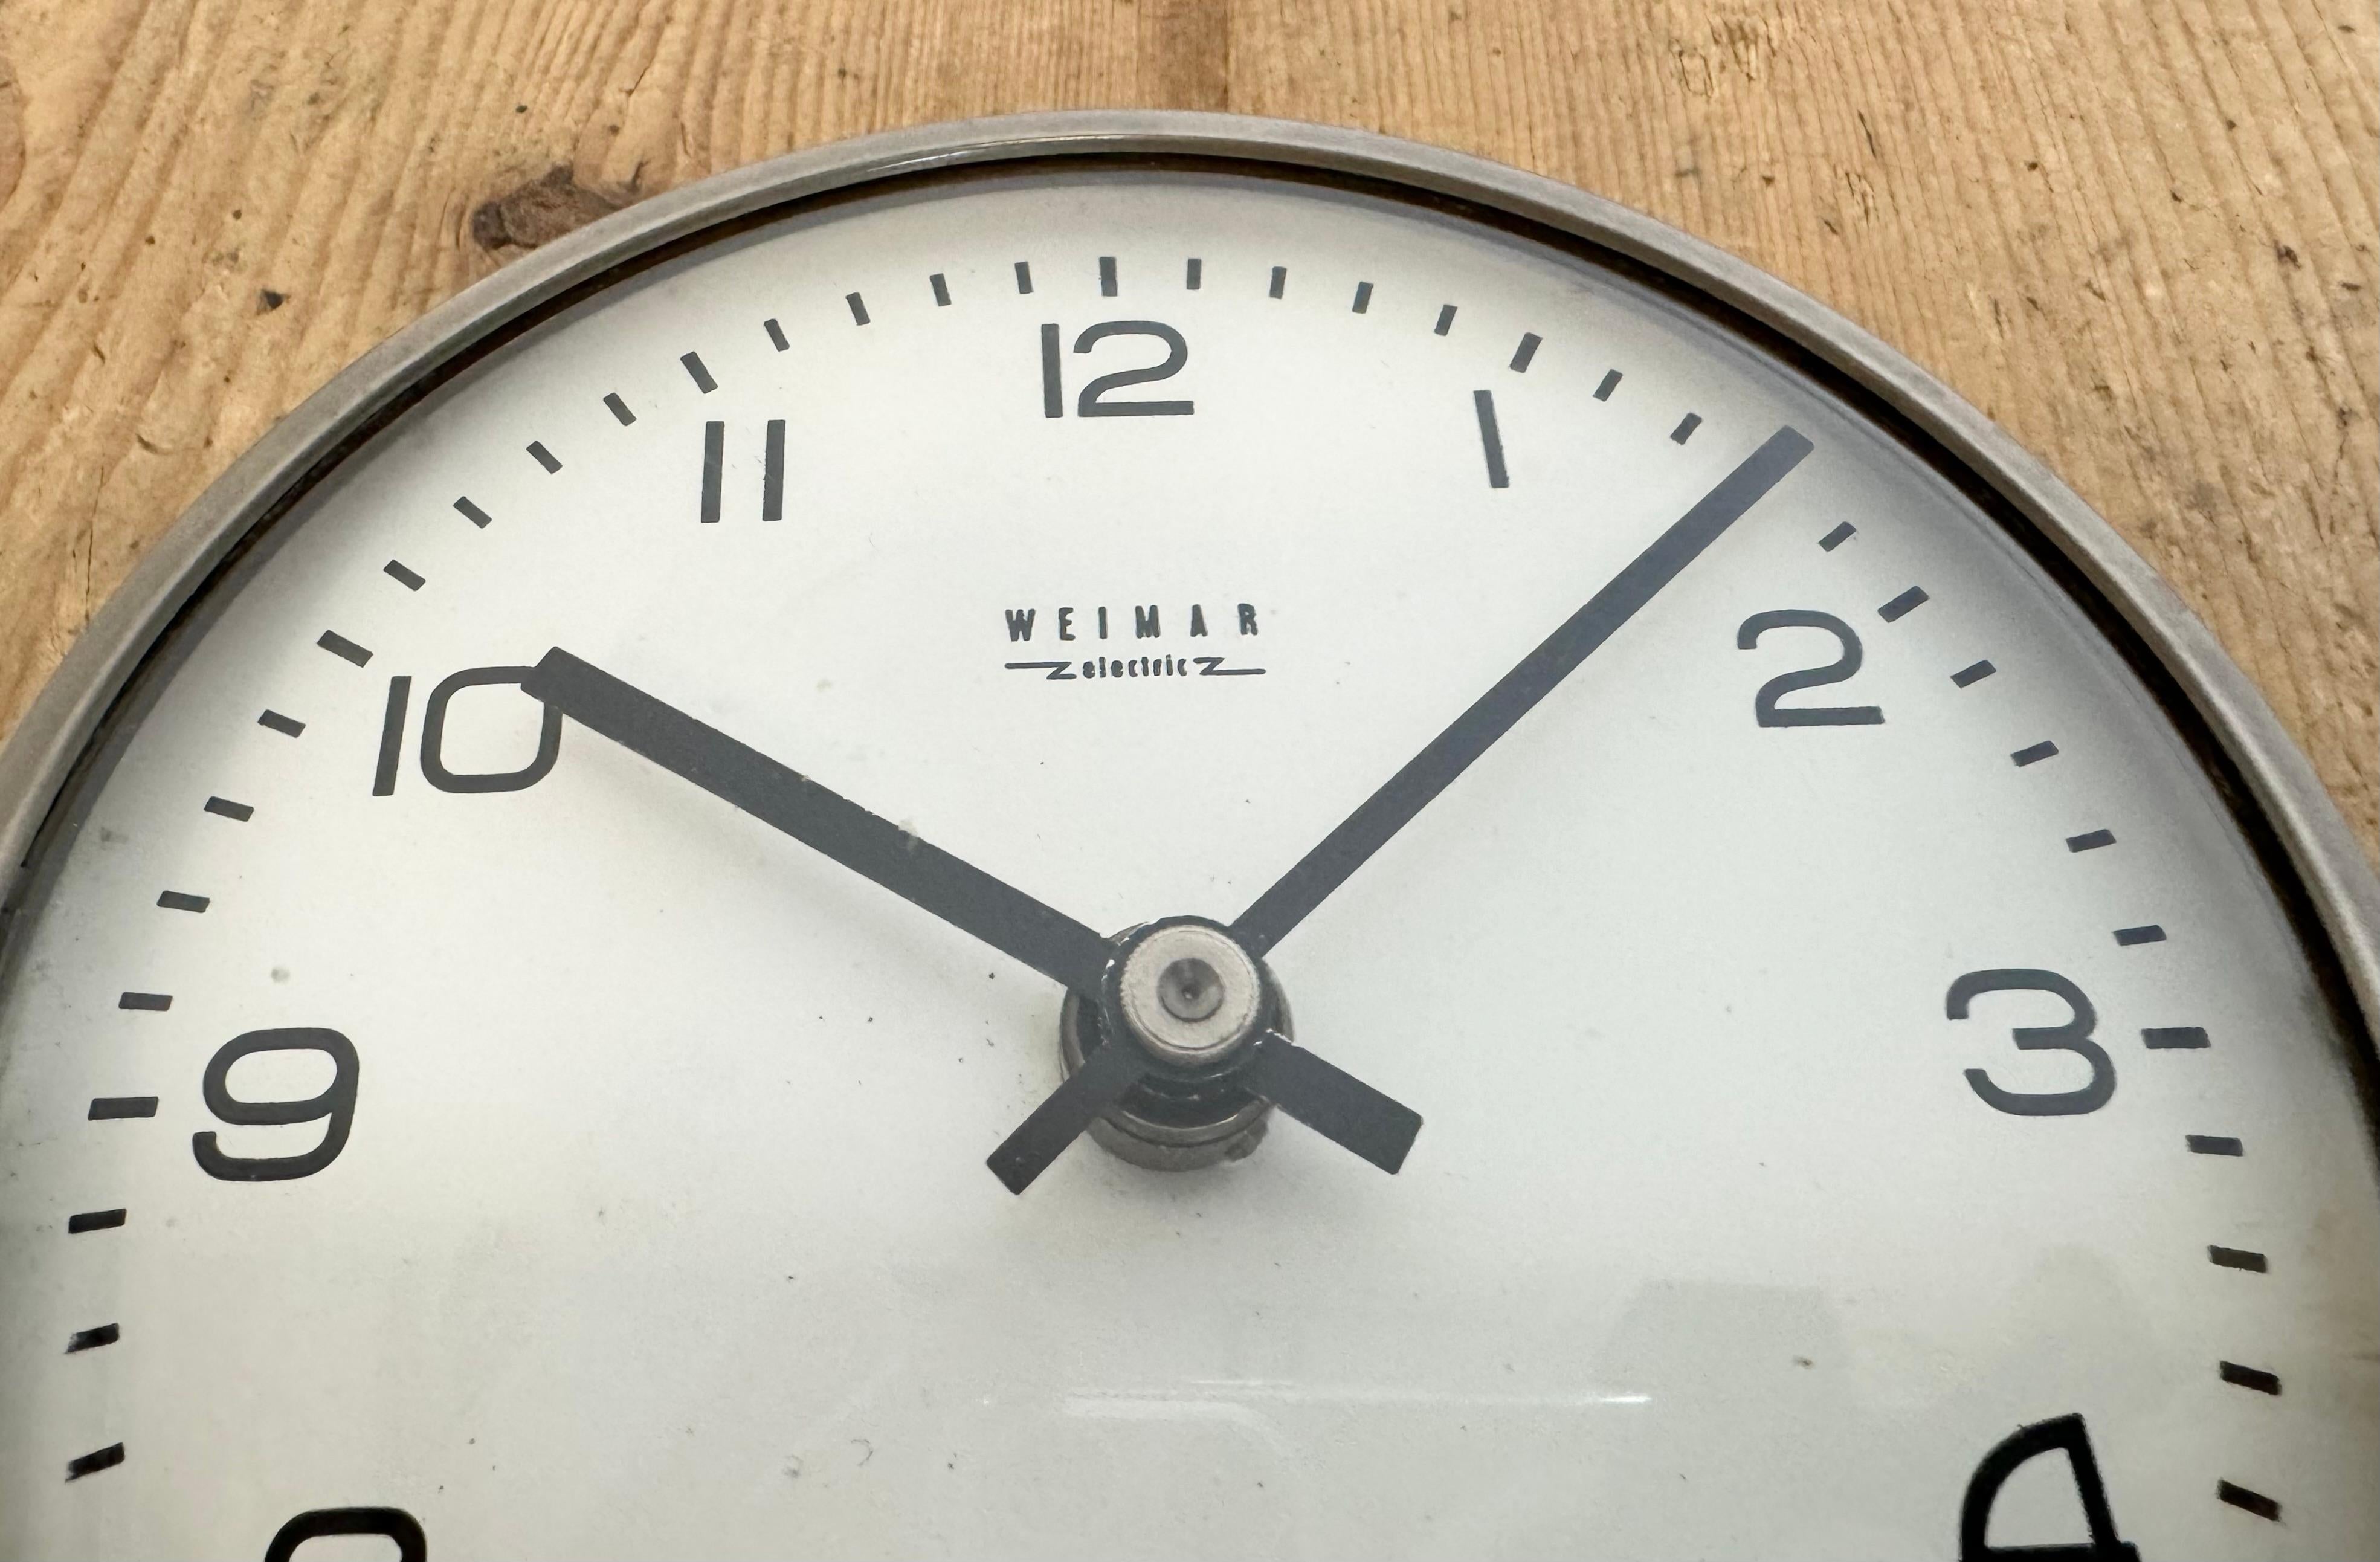 Vintage Grey East German Wall Clock from Weimar Electric, 1970s For Sale 6